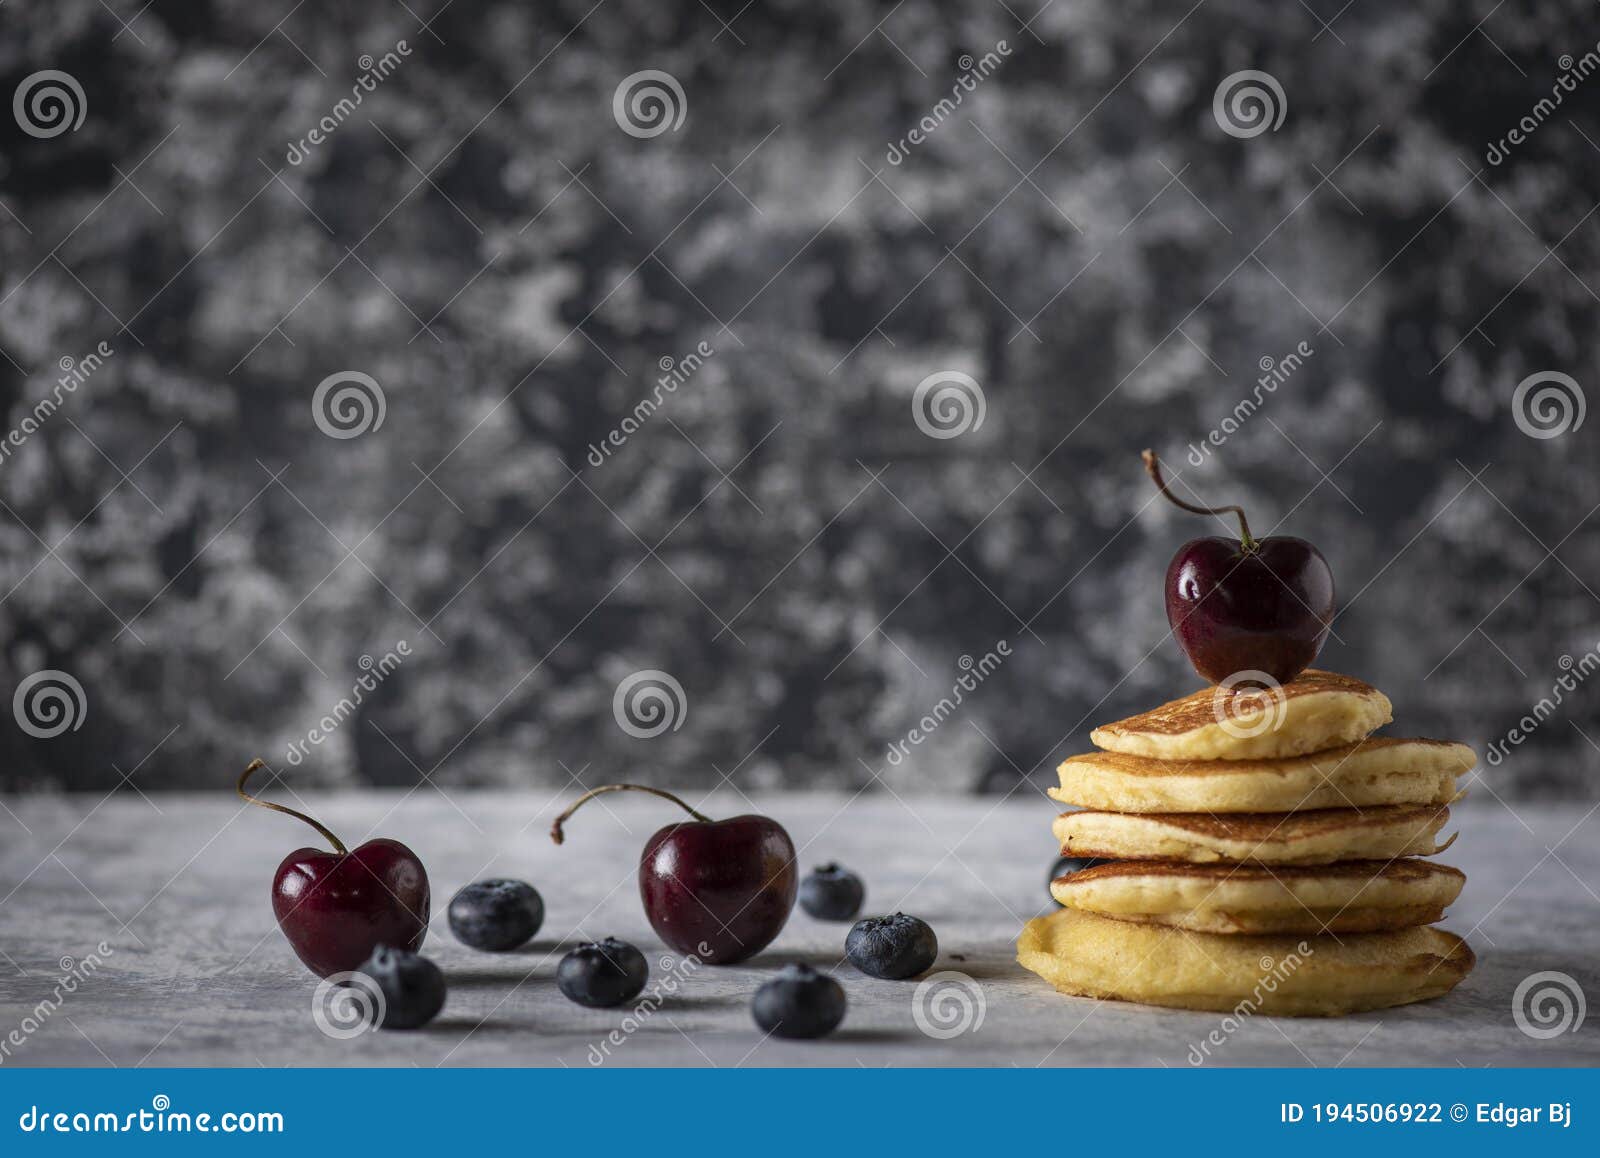 hot cakes with strawberries and cherries seen from close up